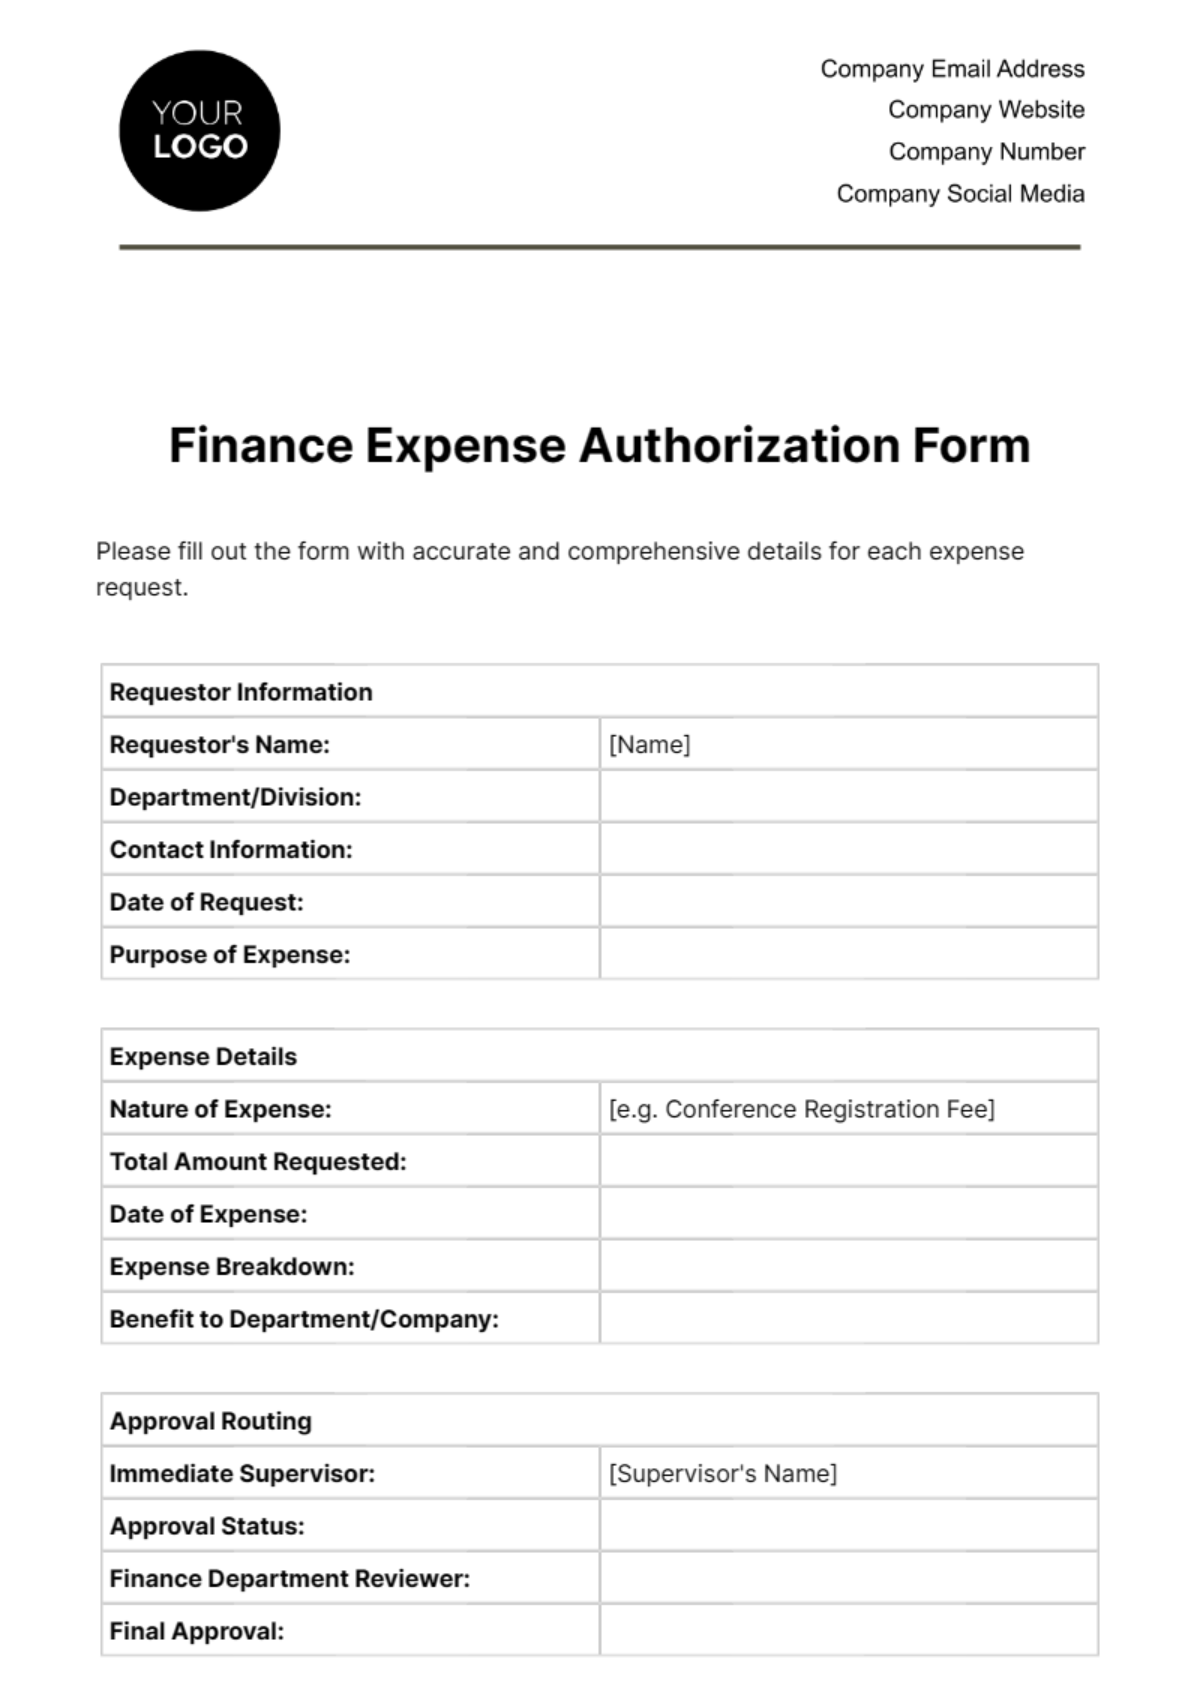 Free Finance Expense Authorization Form Template